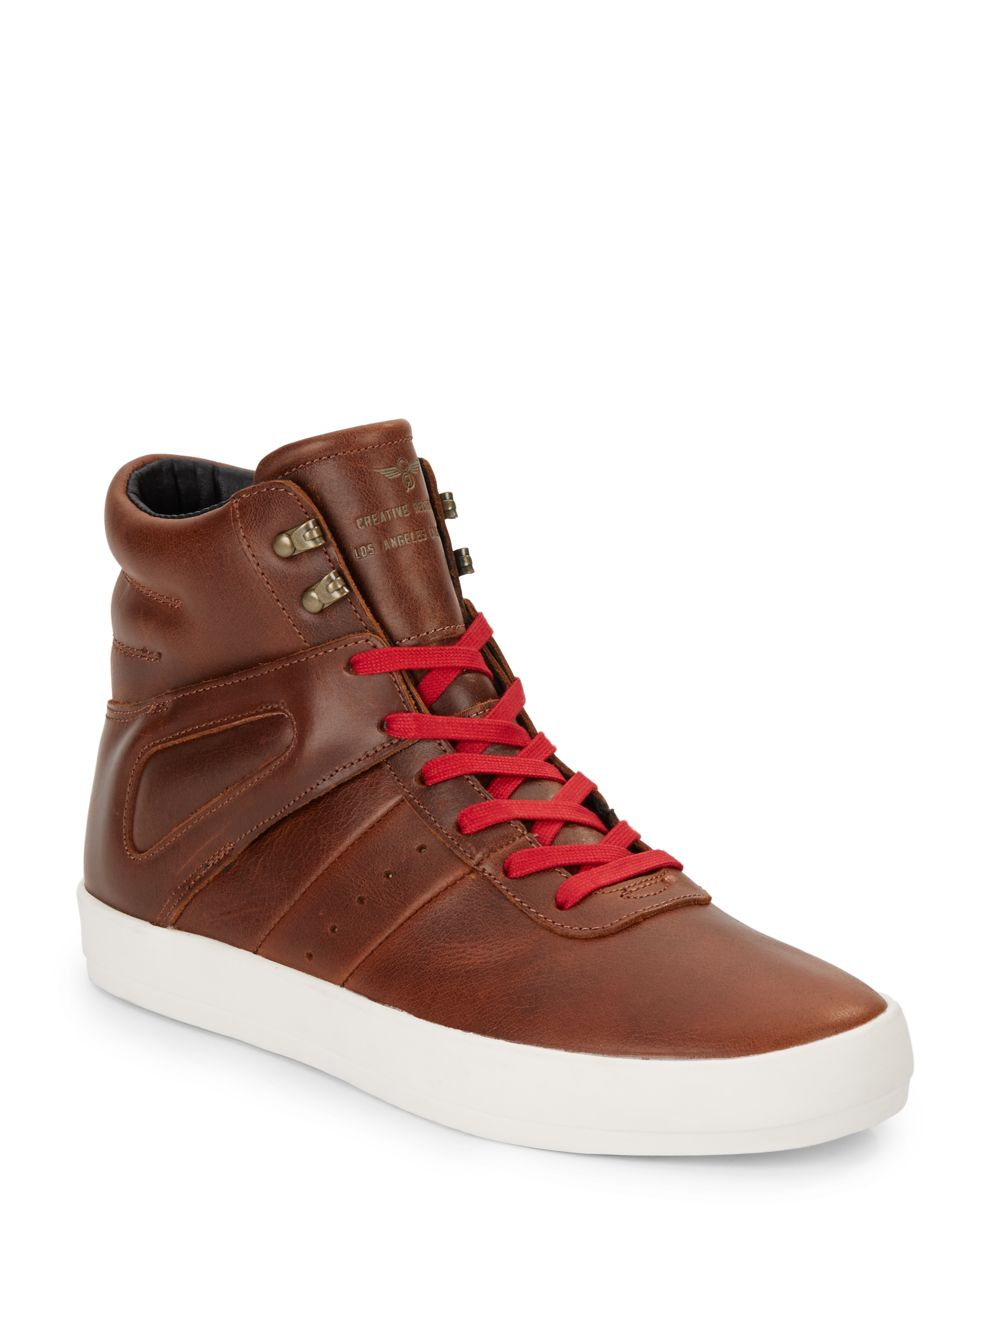 Creative Recreation Moretti Leather High Top Sneakers in Brown for Men ...